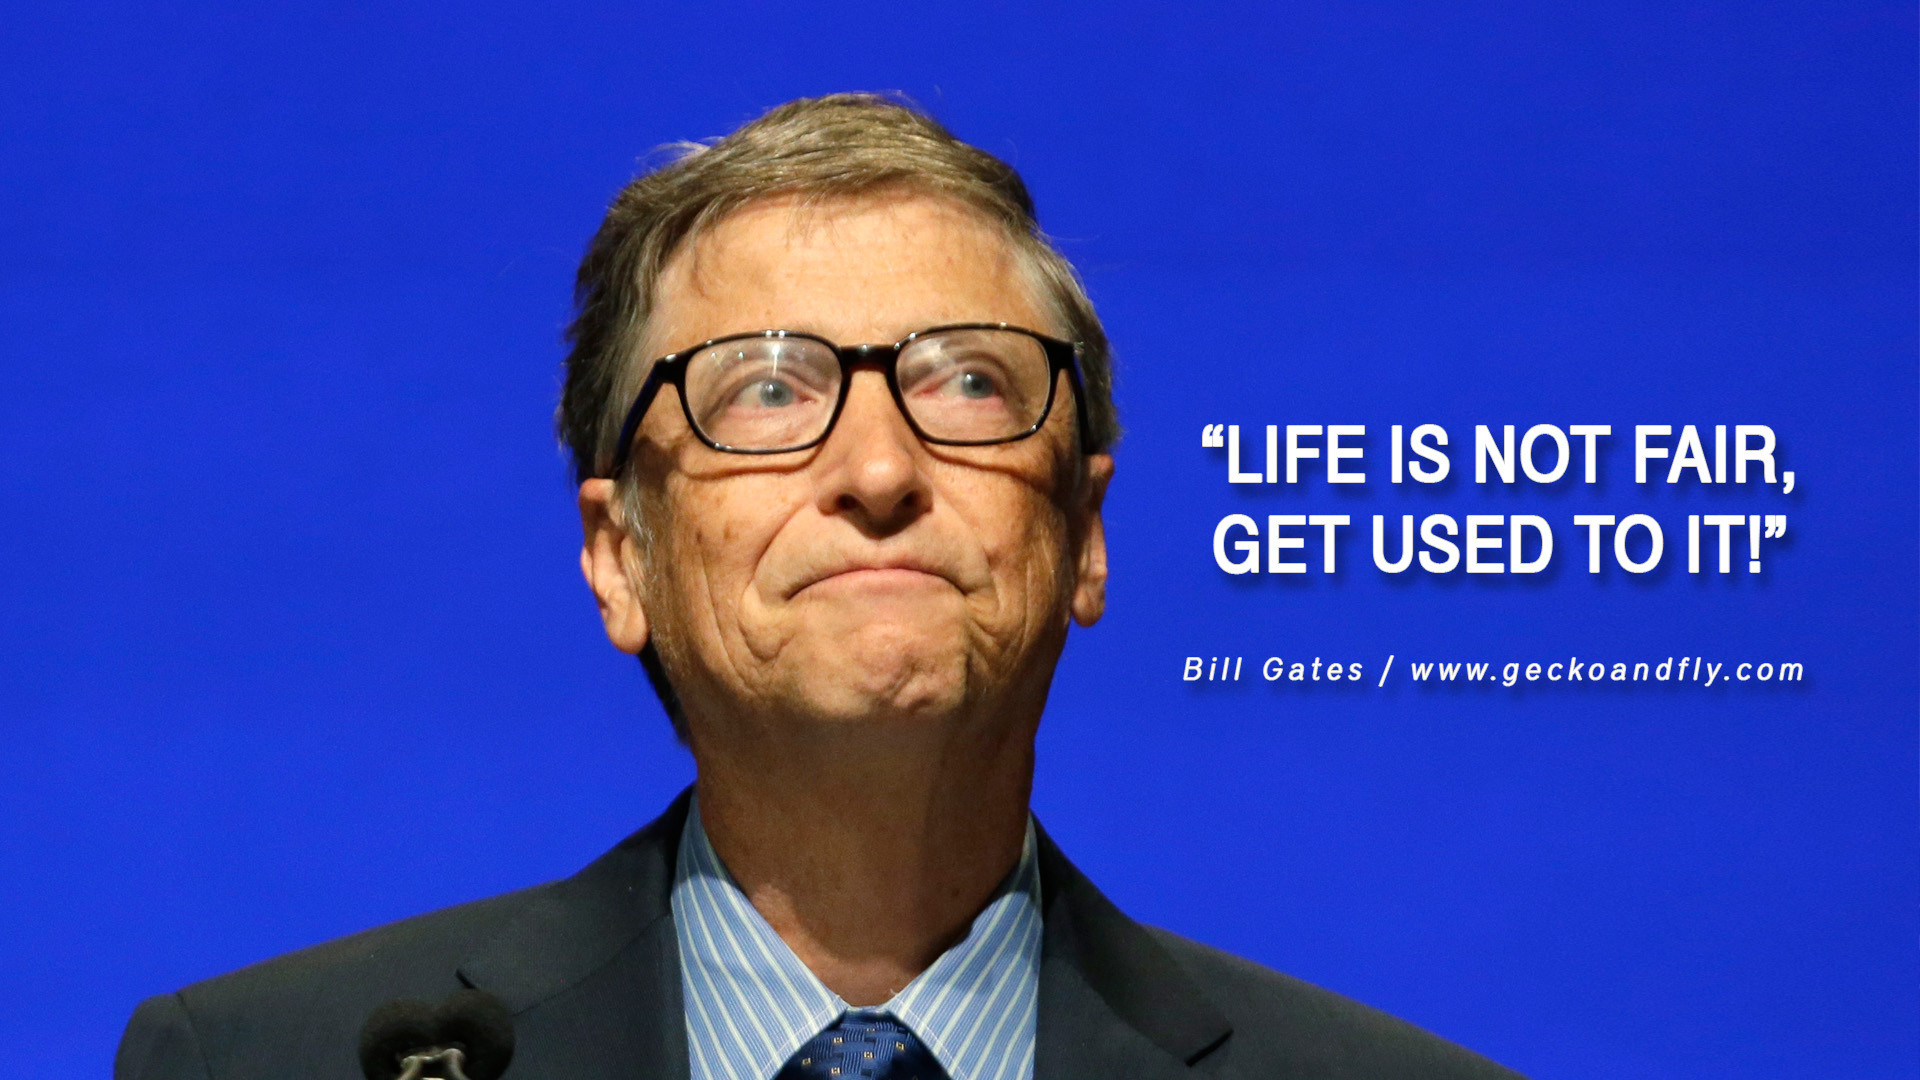 1920x1080 bill gates quotes | Bill Gates Quotes Life is not fair, get used to it